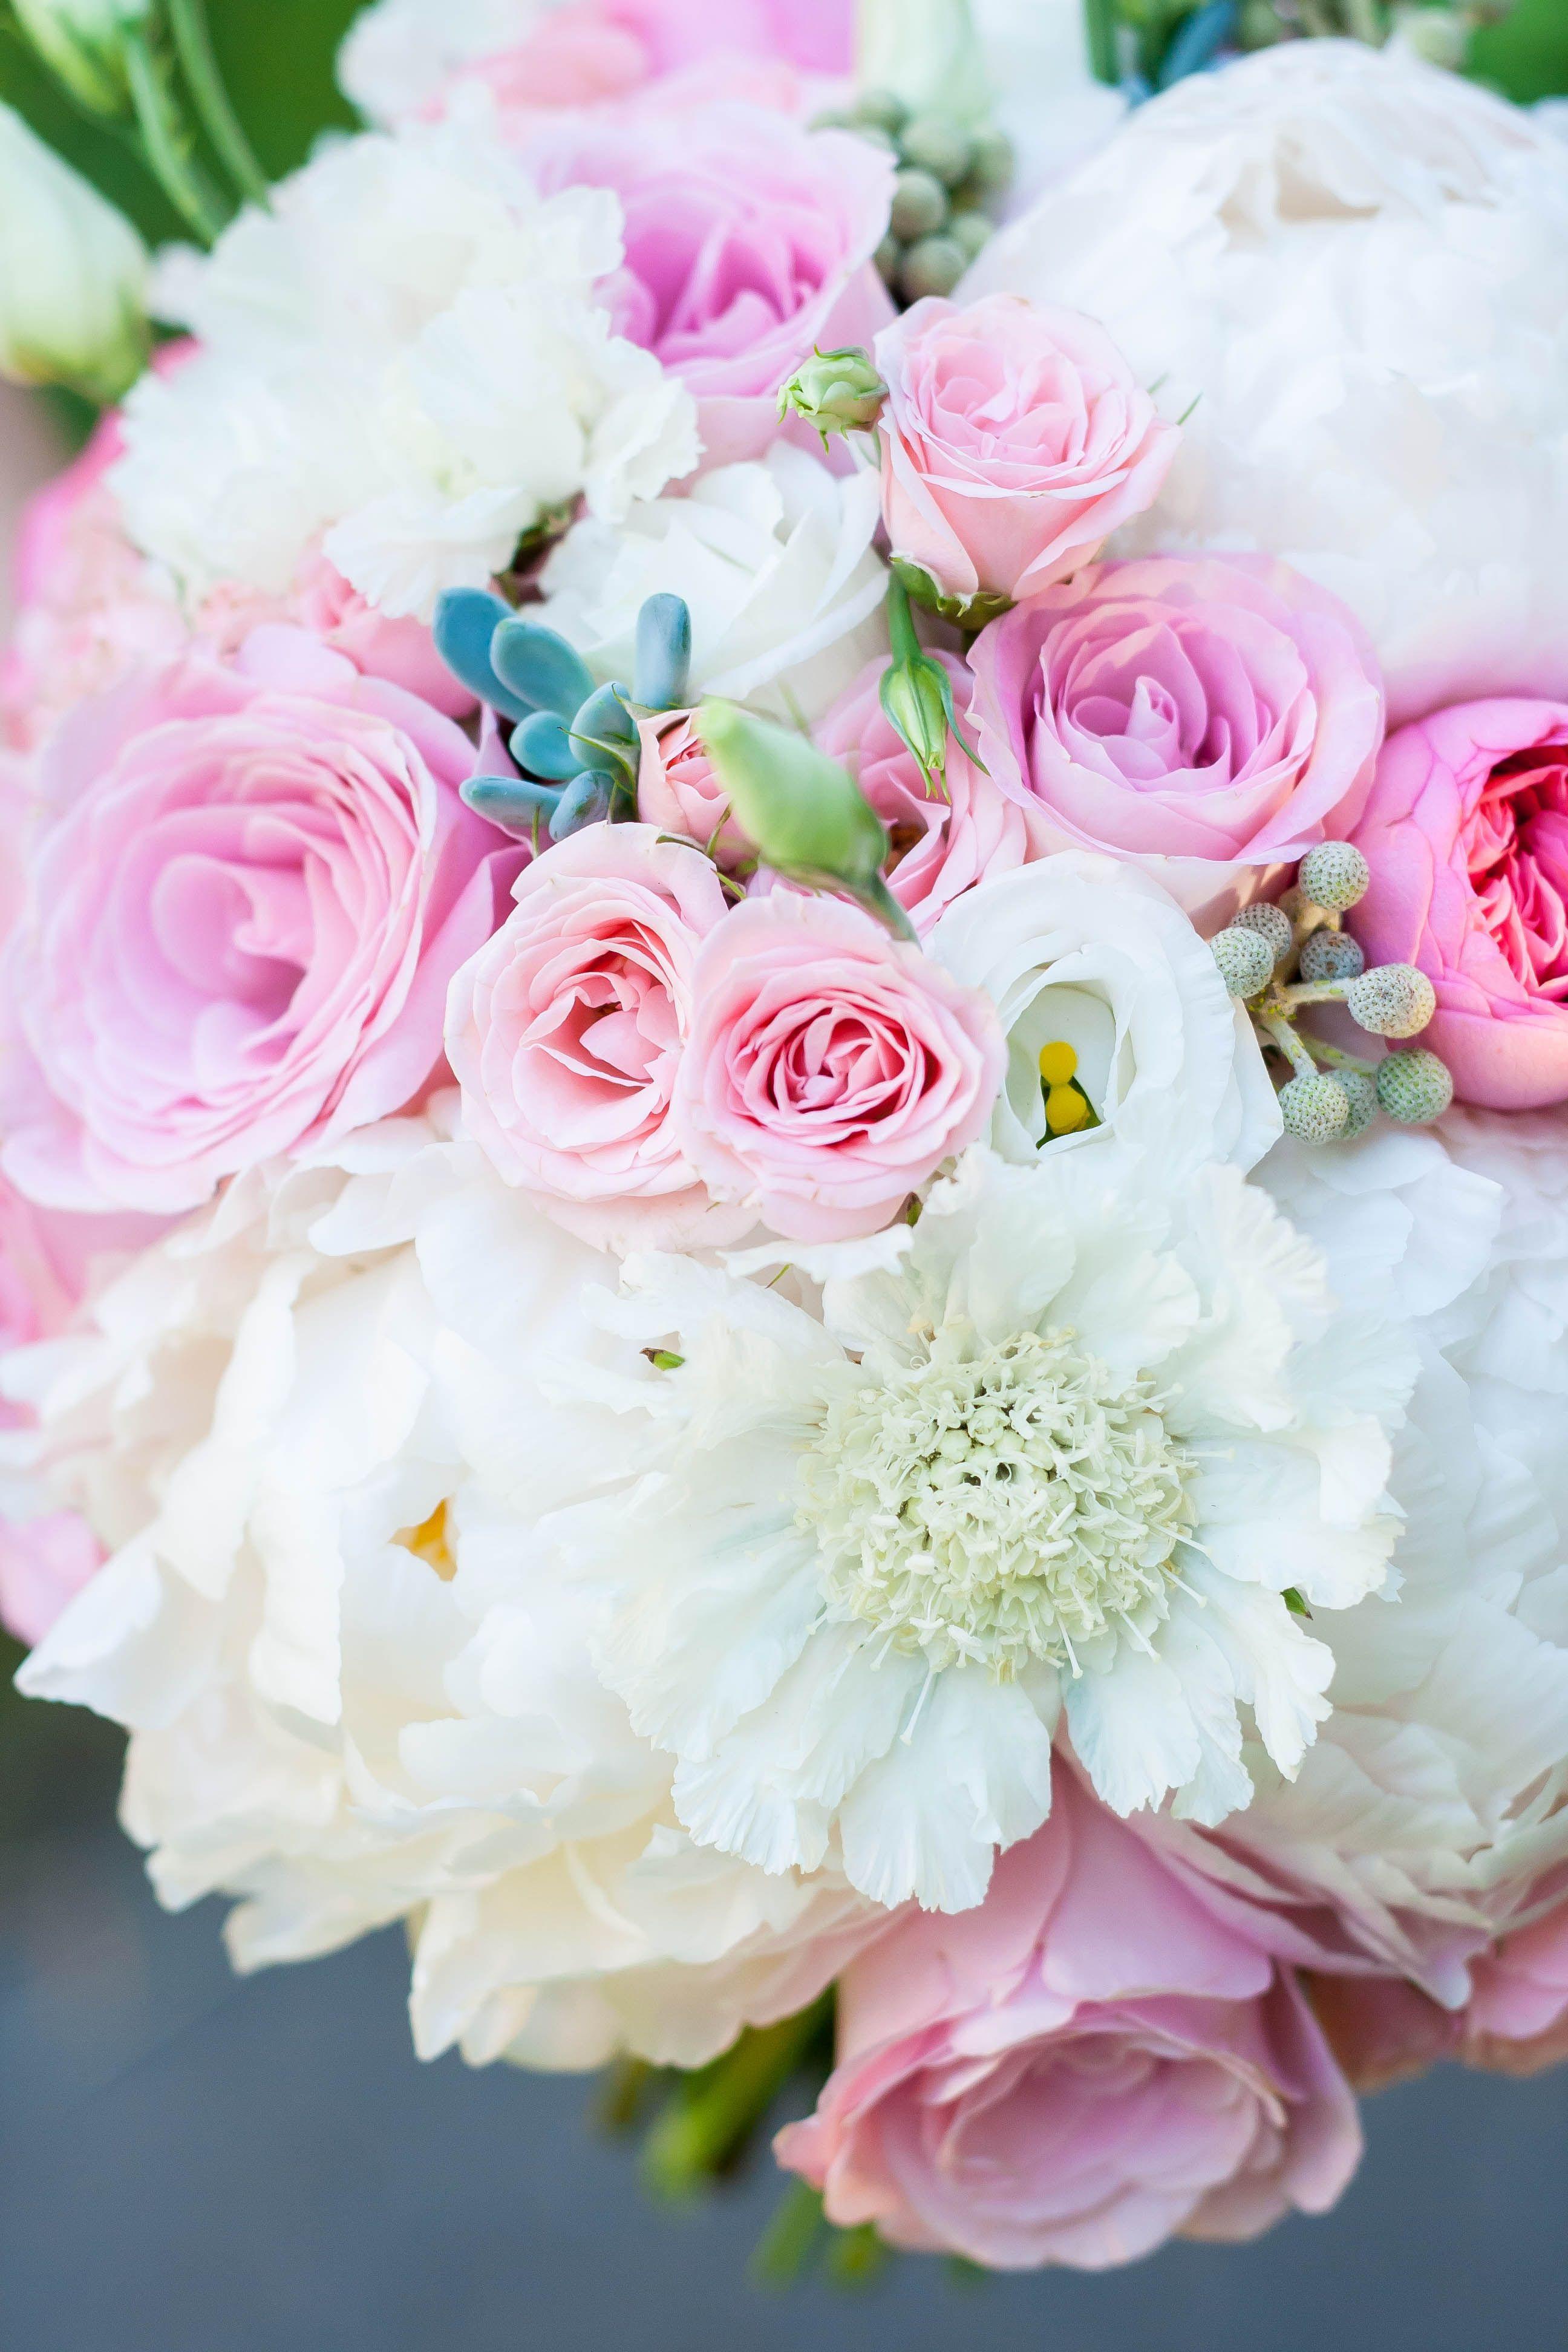 Gorgeous pink and white bouquet. Flowers are: spray roses, roses